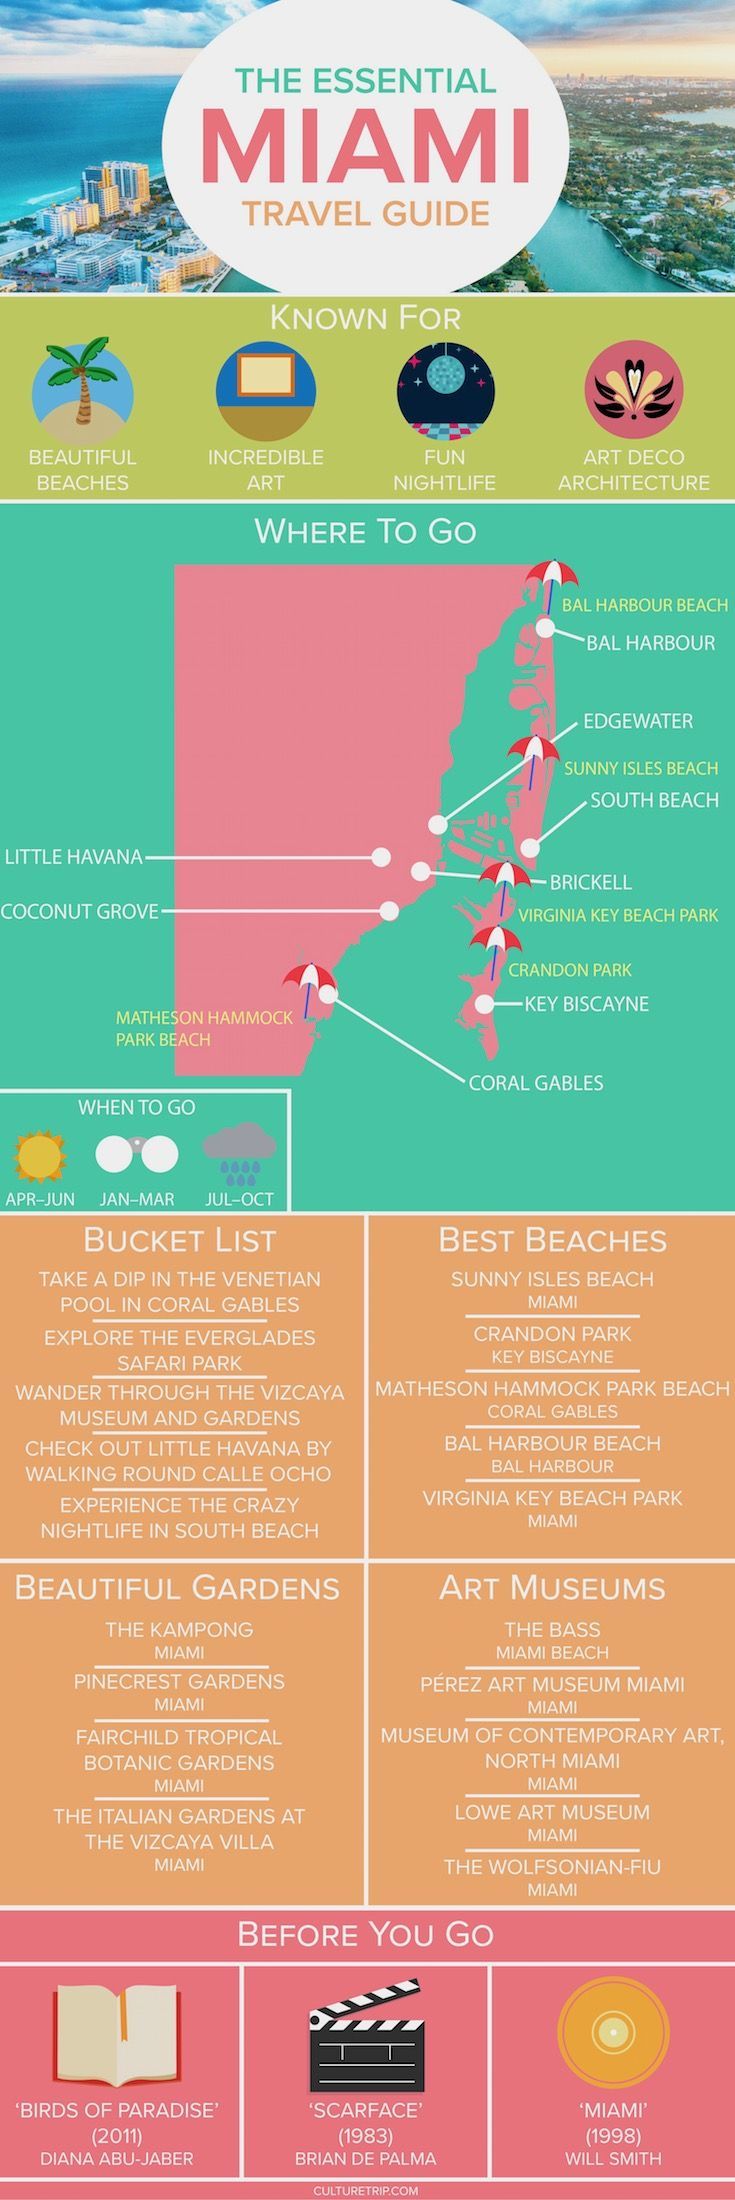 The Essential Travel Guide to Miami (Infographic)